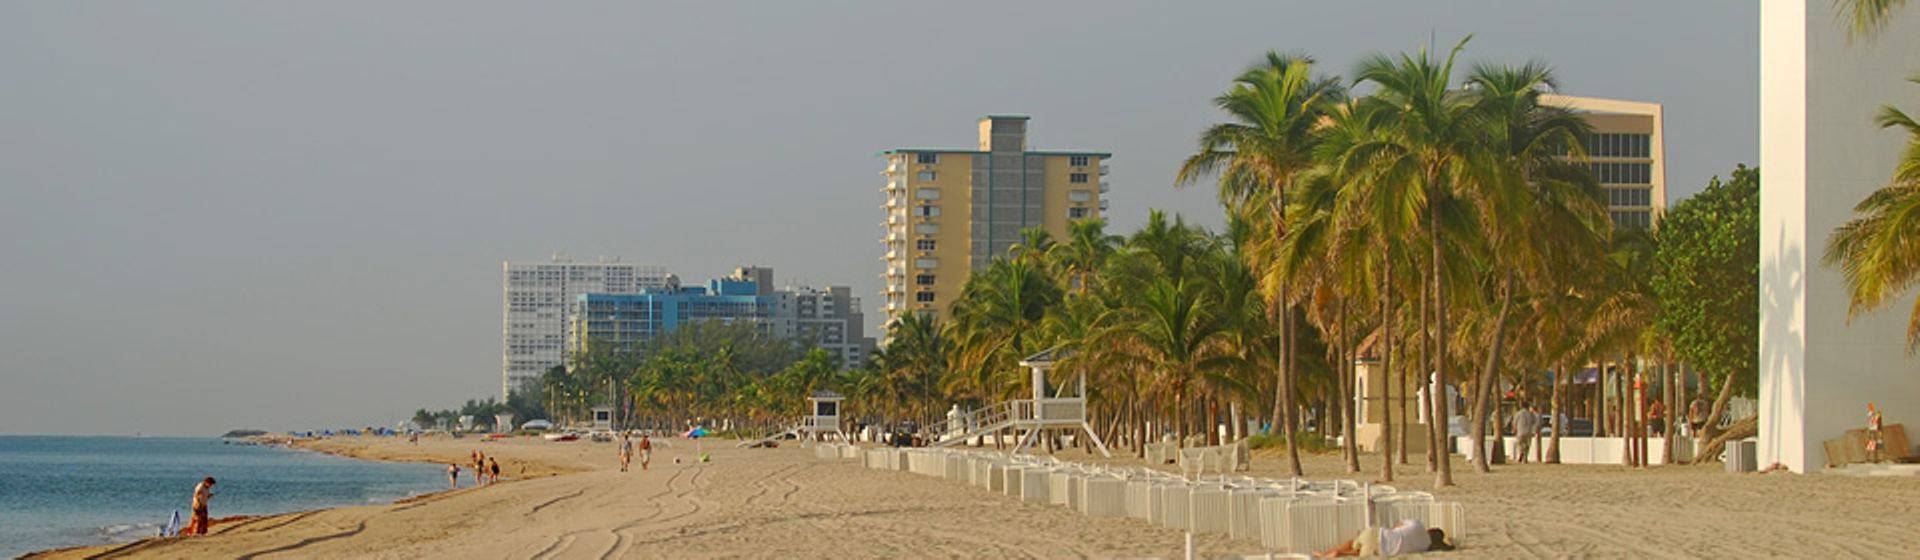 Holidays to Fort Lauderdale Image